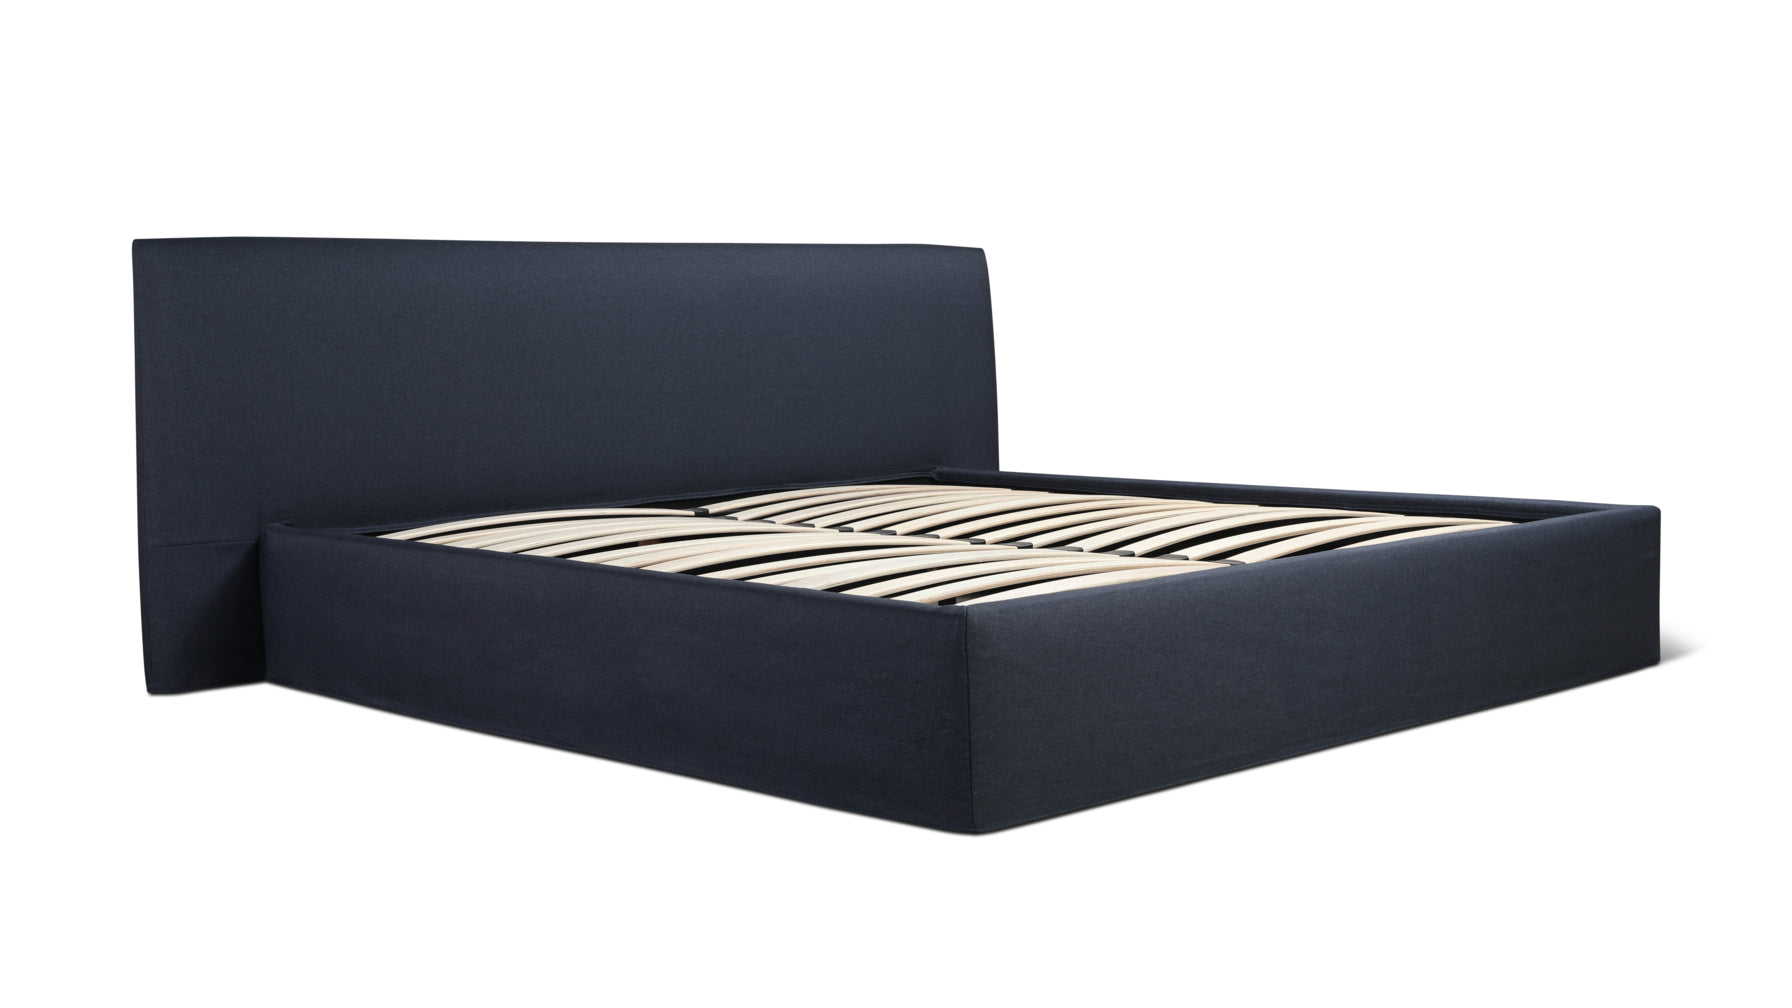 Wave Bed with Storage, King, Midnight - Image 5